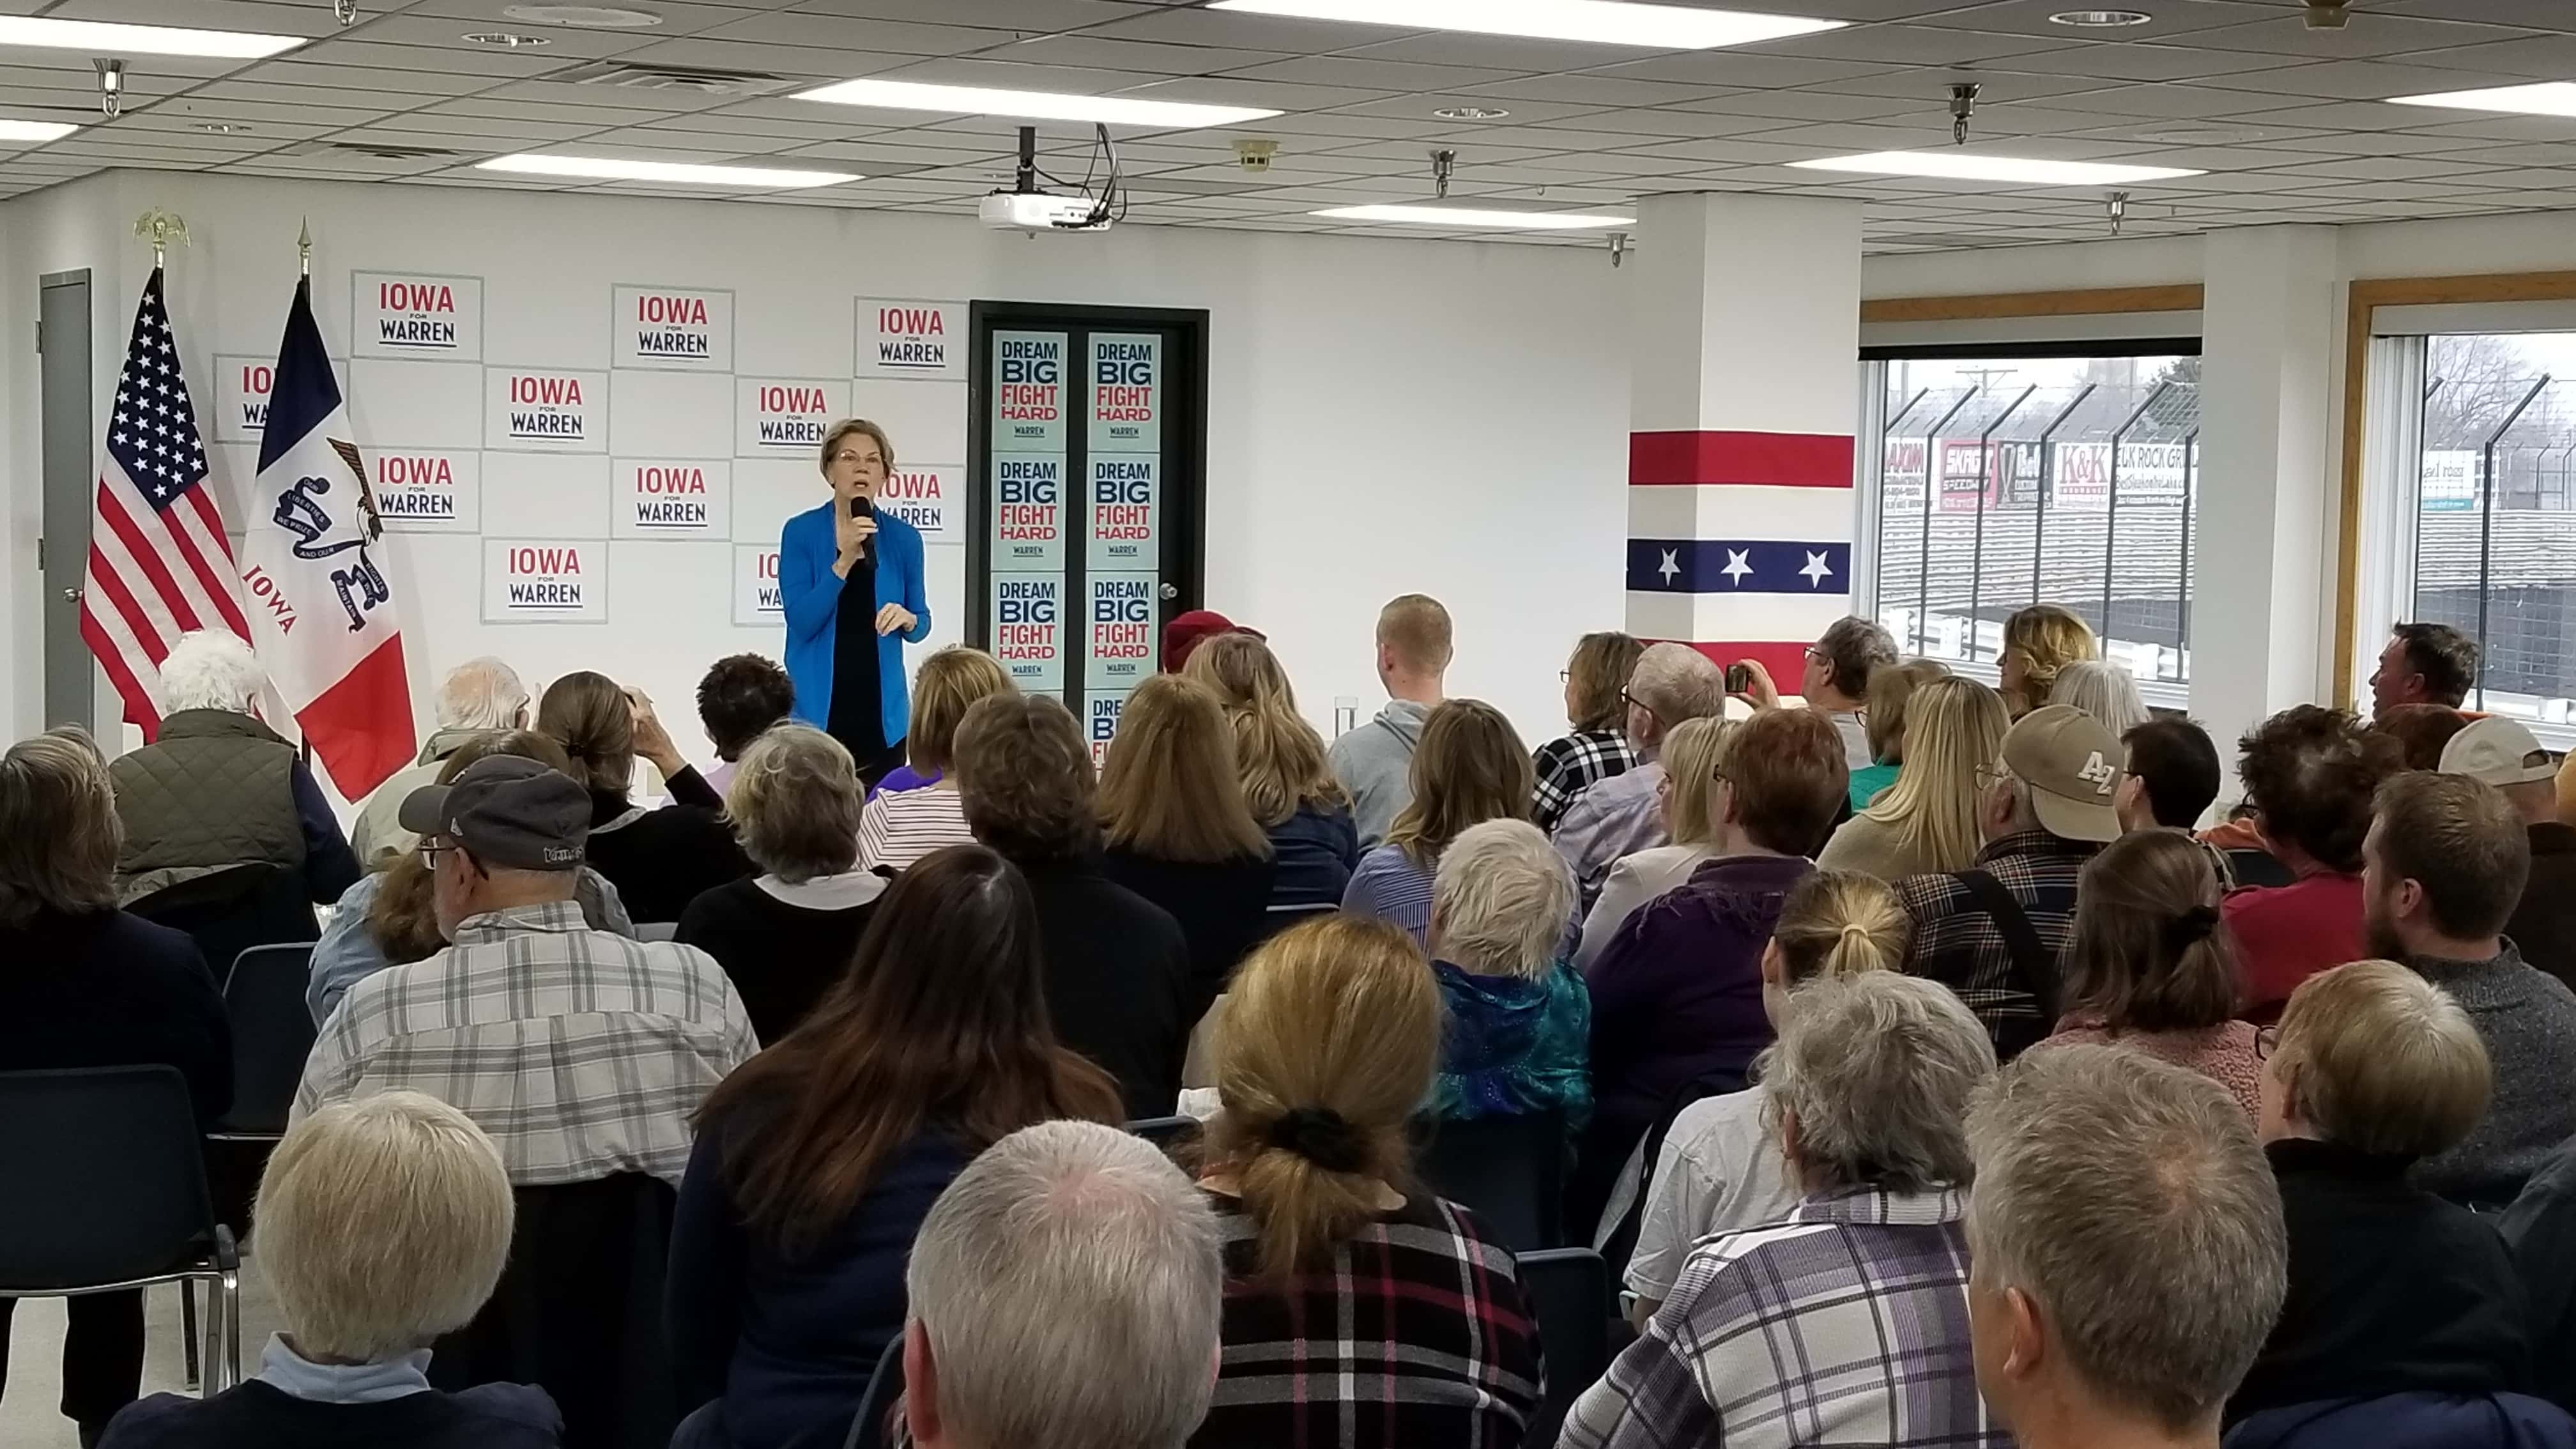 Senator Elizabeth Warren Makes a Stop in Knoxville | KNIA KRLS Radio - The One to Count On4032 x 2268